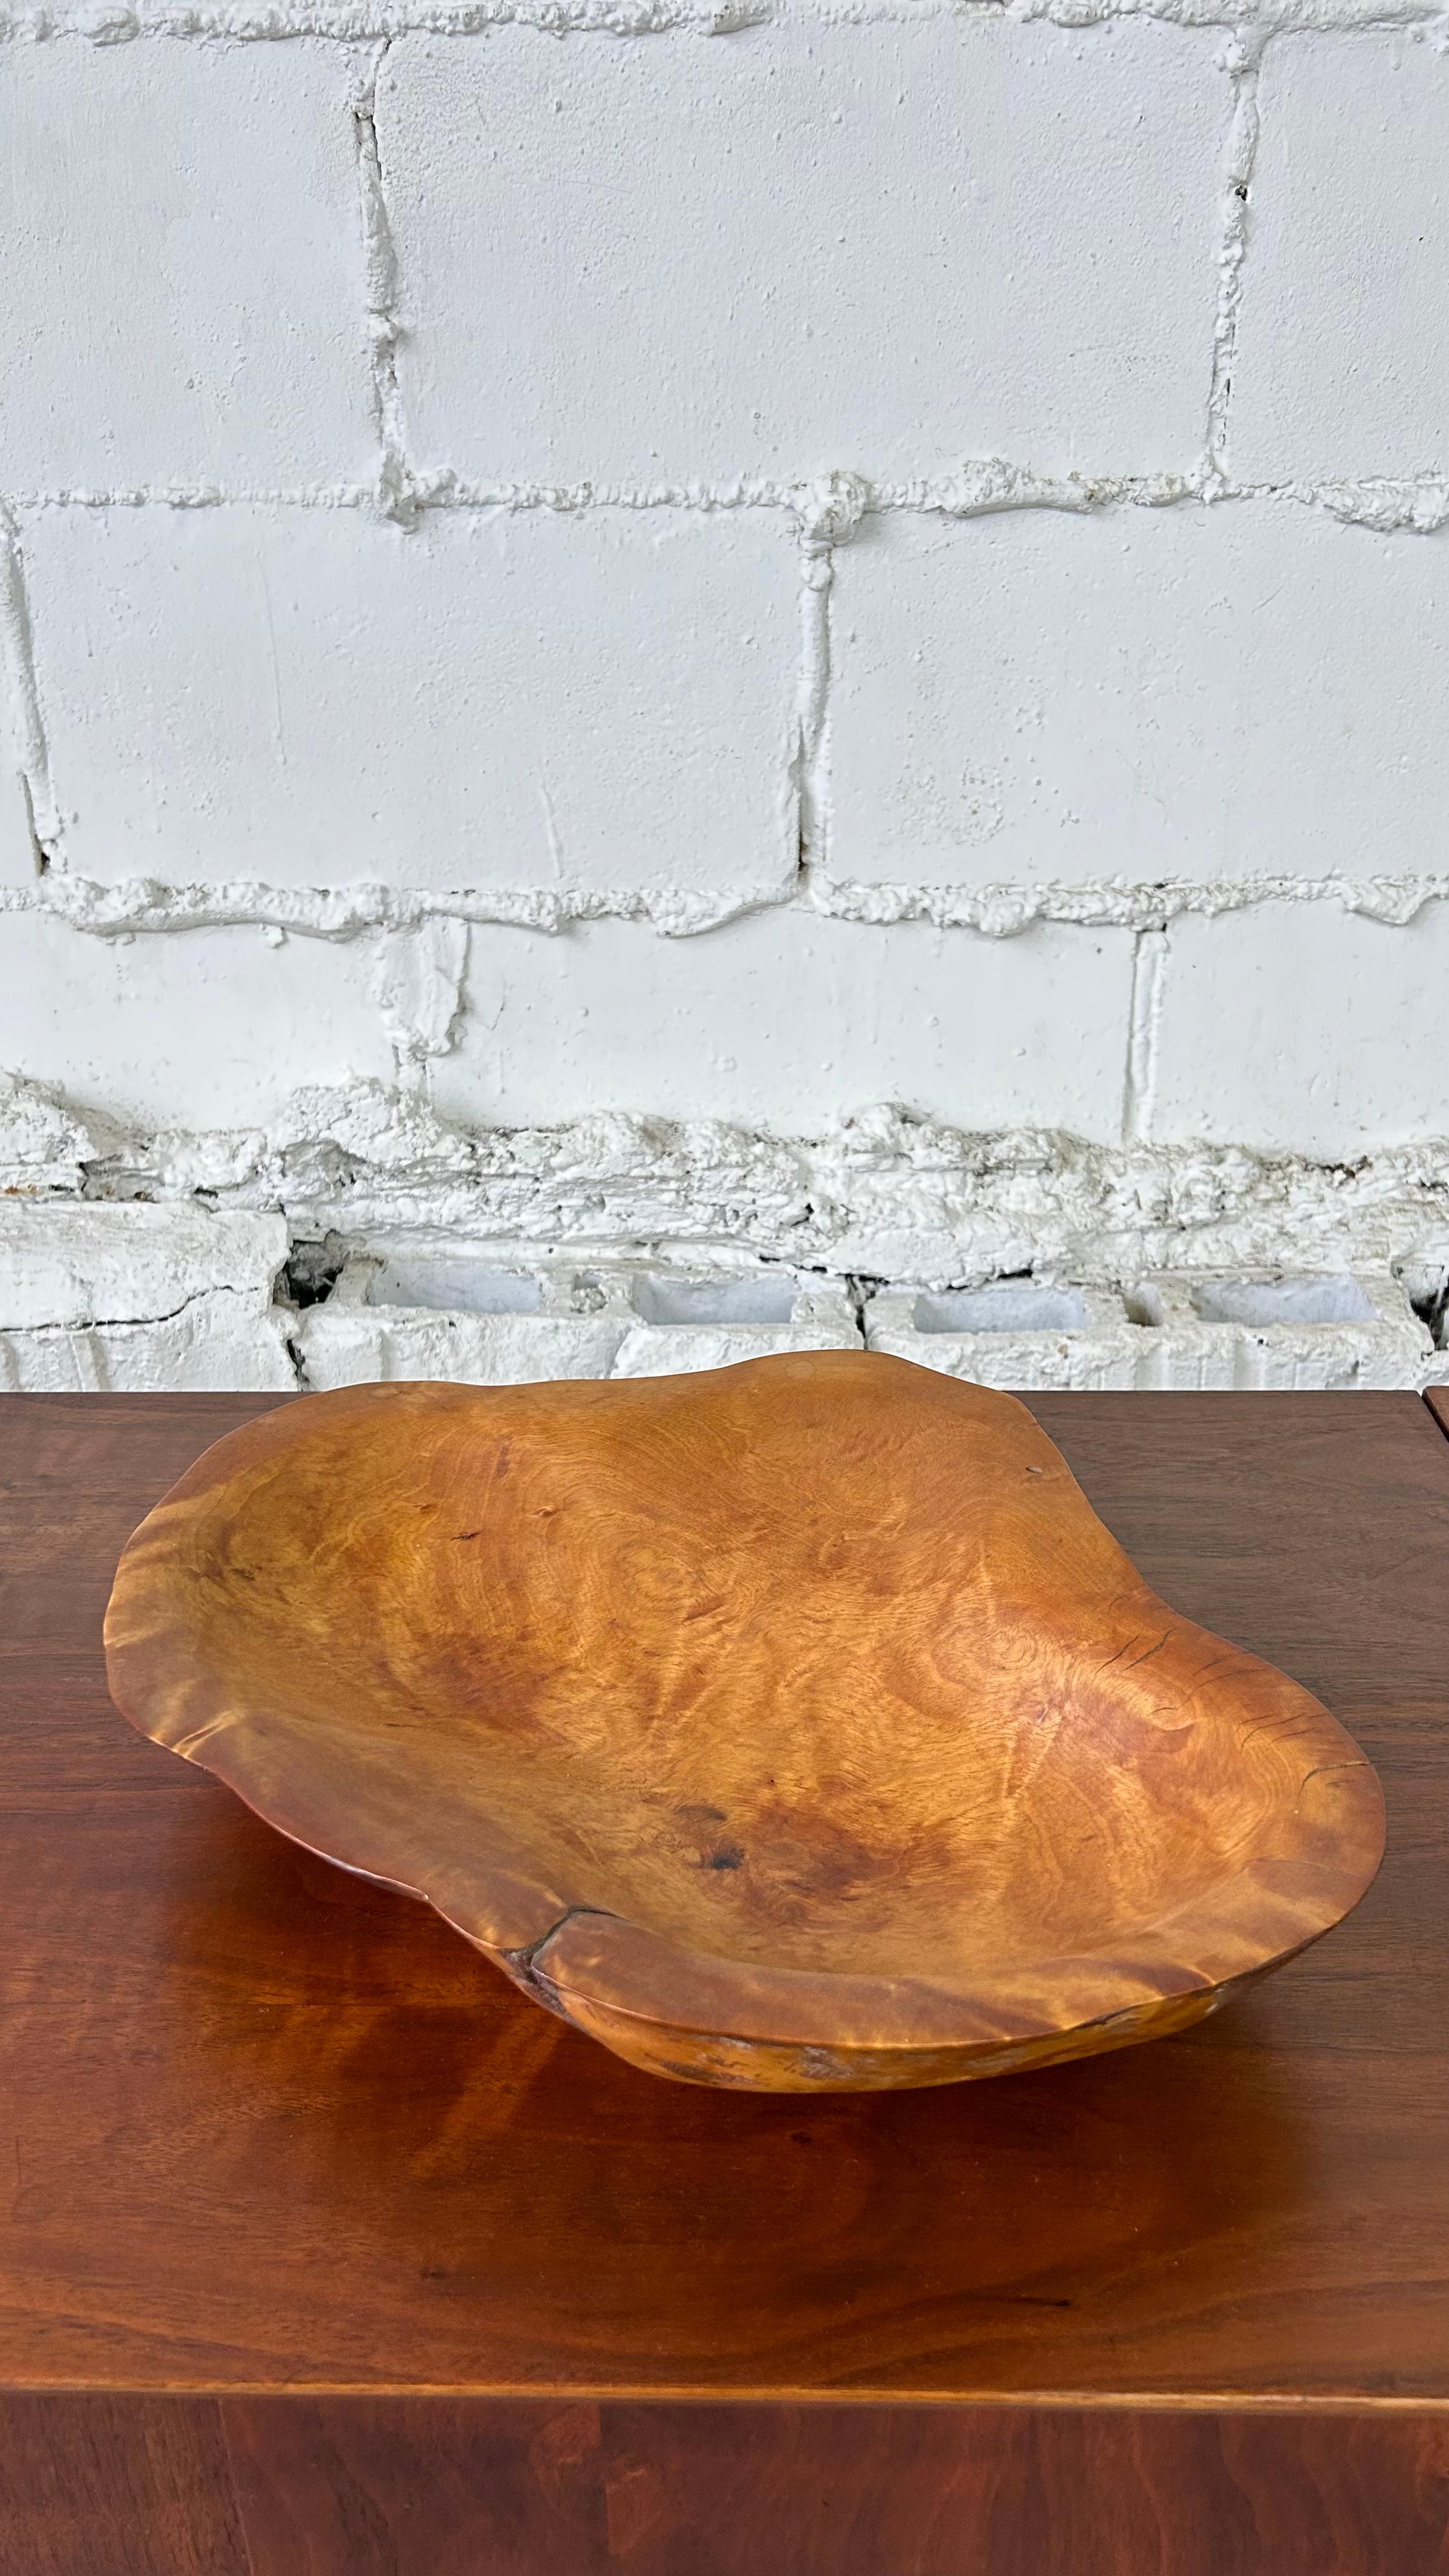 About the piece:
One-of-a-kind yellow birch burl wood bowl by famous American sculptor, Mark Lindquist.  This rare piece is signed by the artist on the underside and dated 1979.  It is a large example of his work measuring over 15